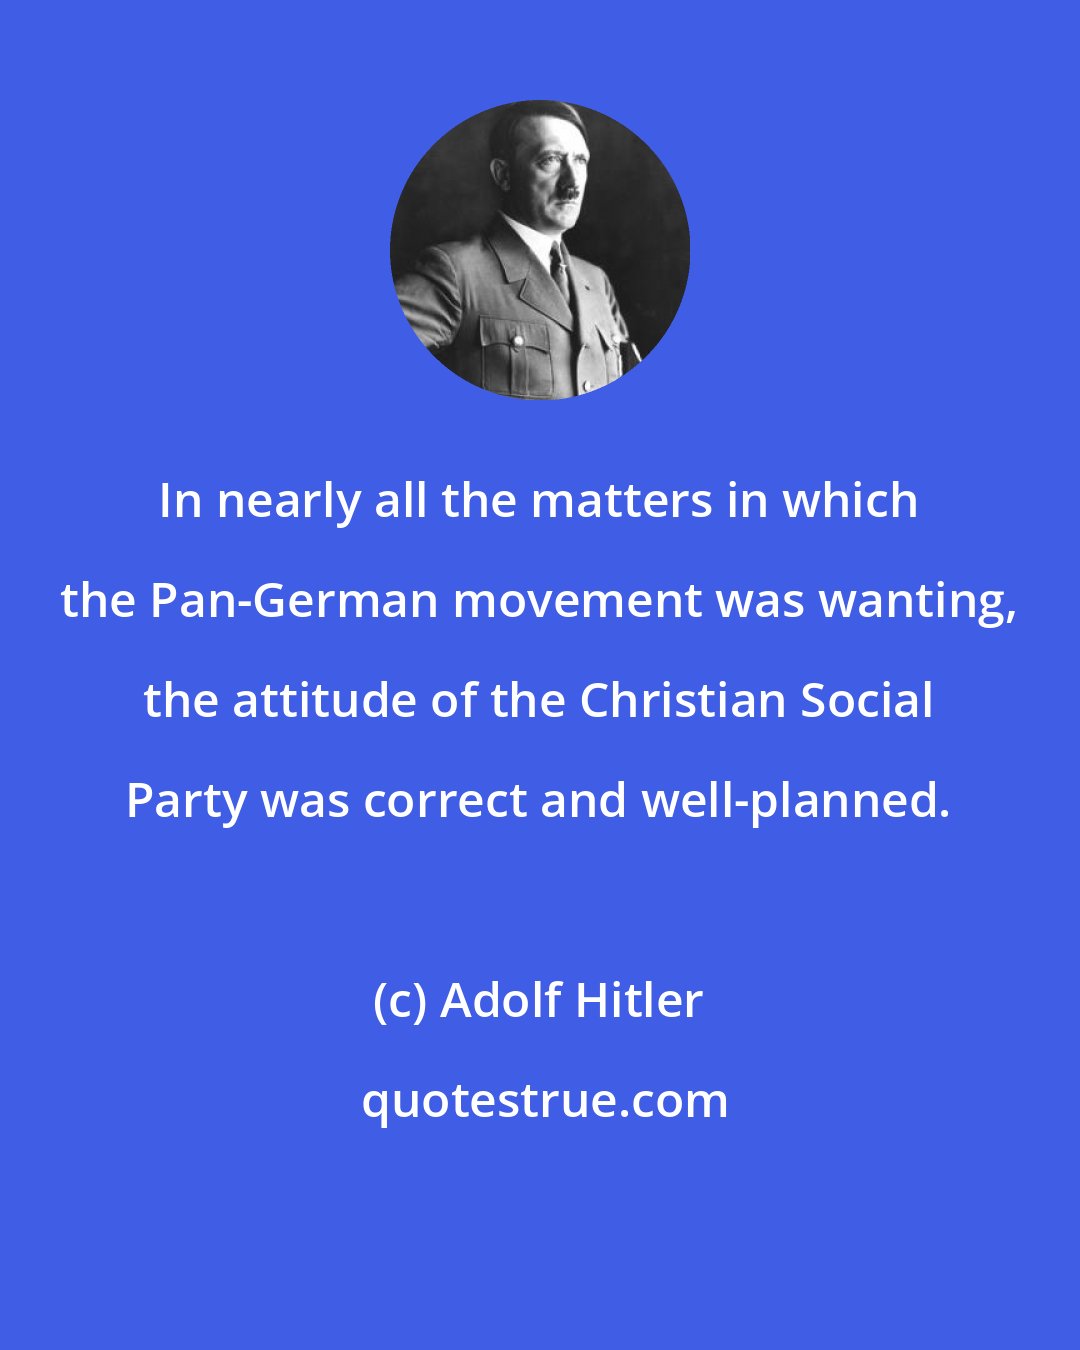 Adolf Hitler: In nearly all the matters in which the Pan-German movement was wanting, the attitude of the Christian Social Party was correct and well-planned.